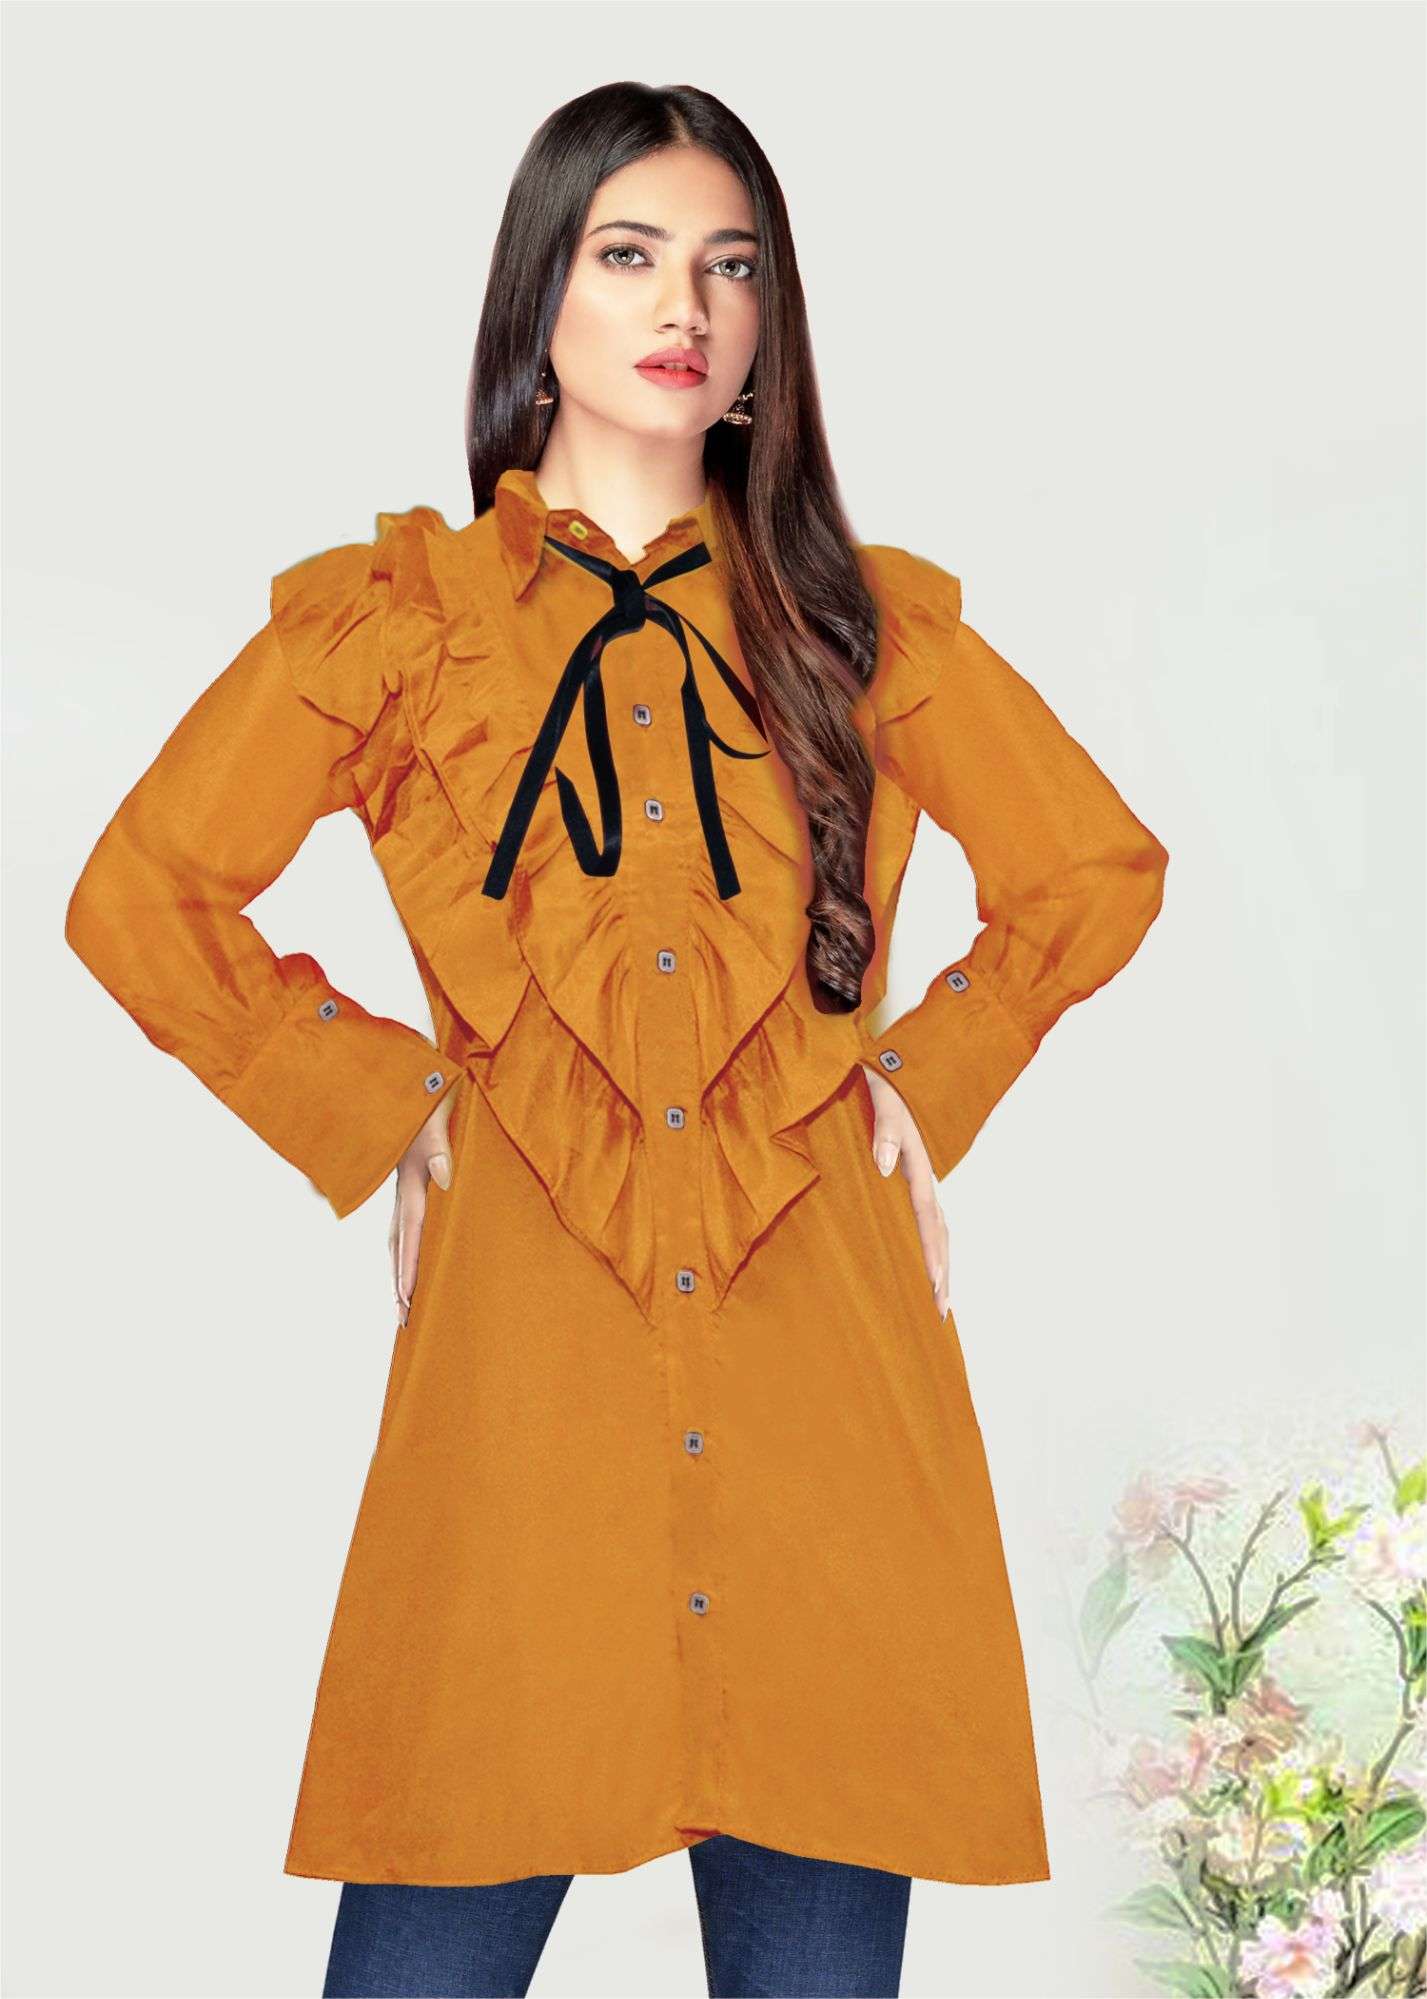 Fashionable Western Tops for Women: Stylish and Versatile Shirts for Every  Occasion plain long shirts